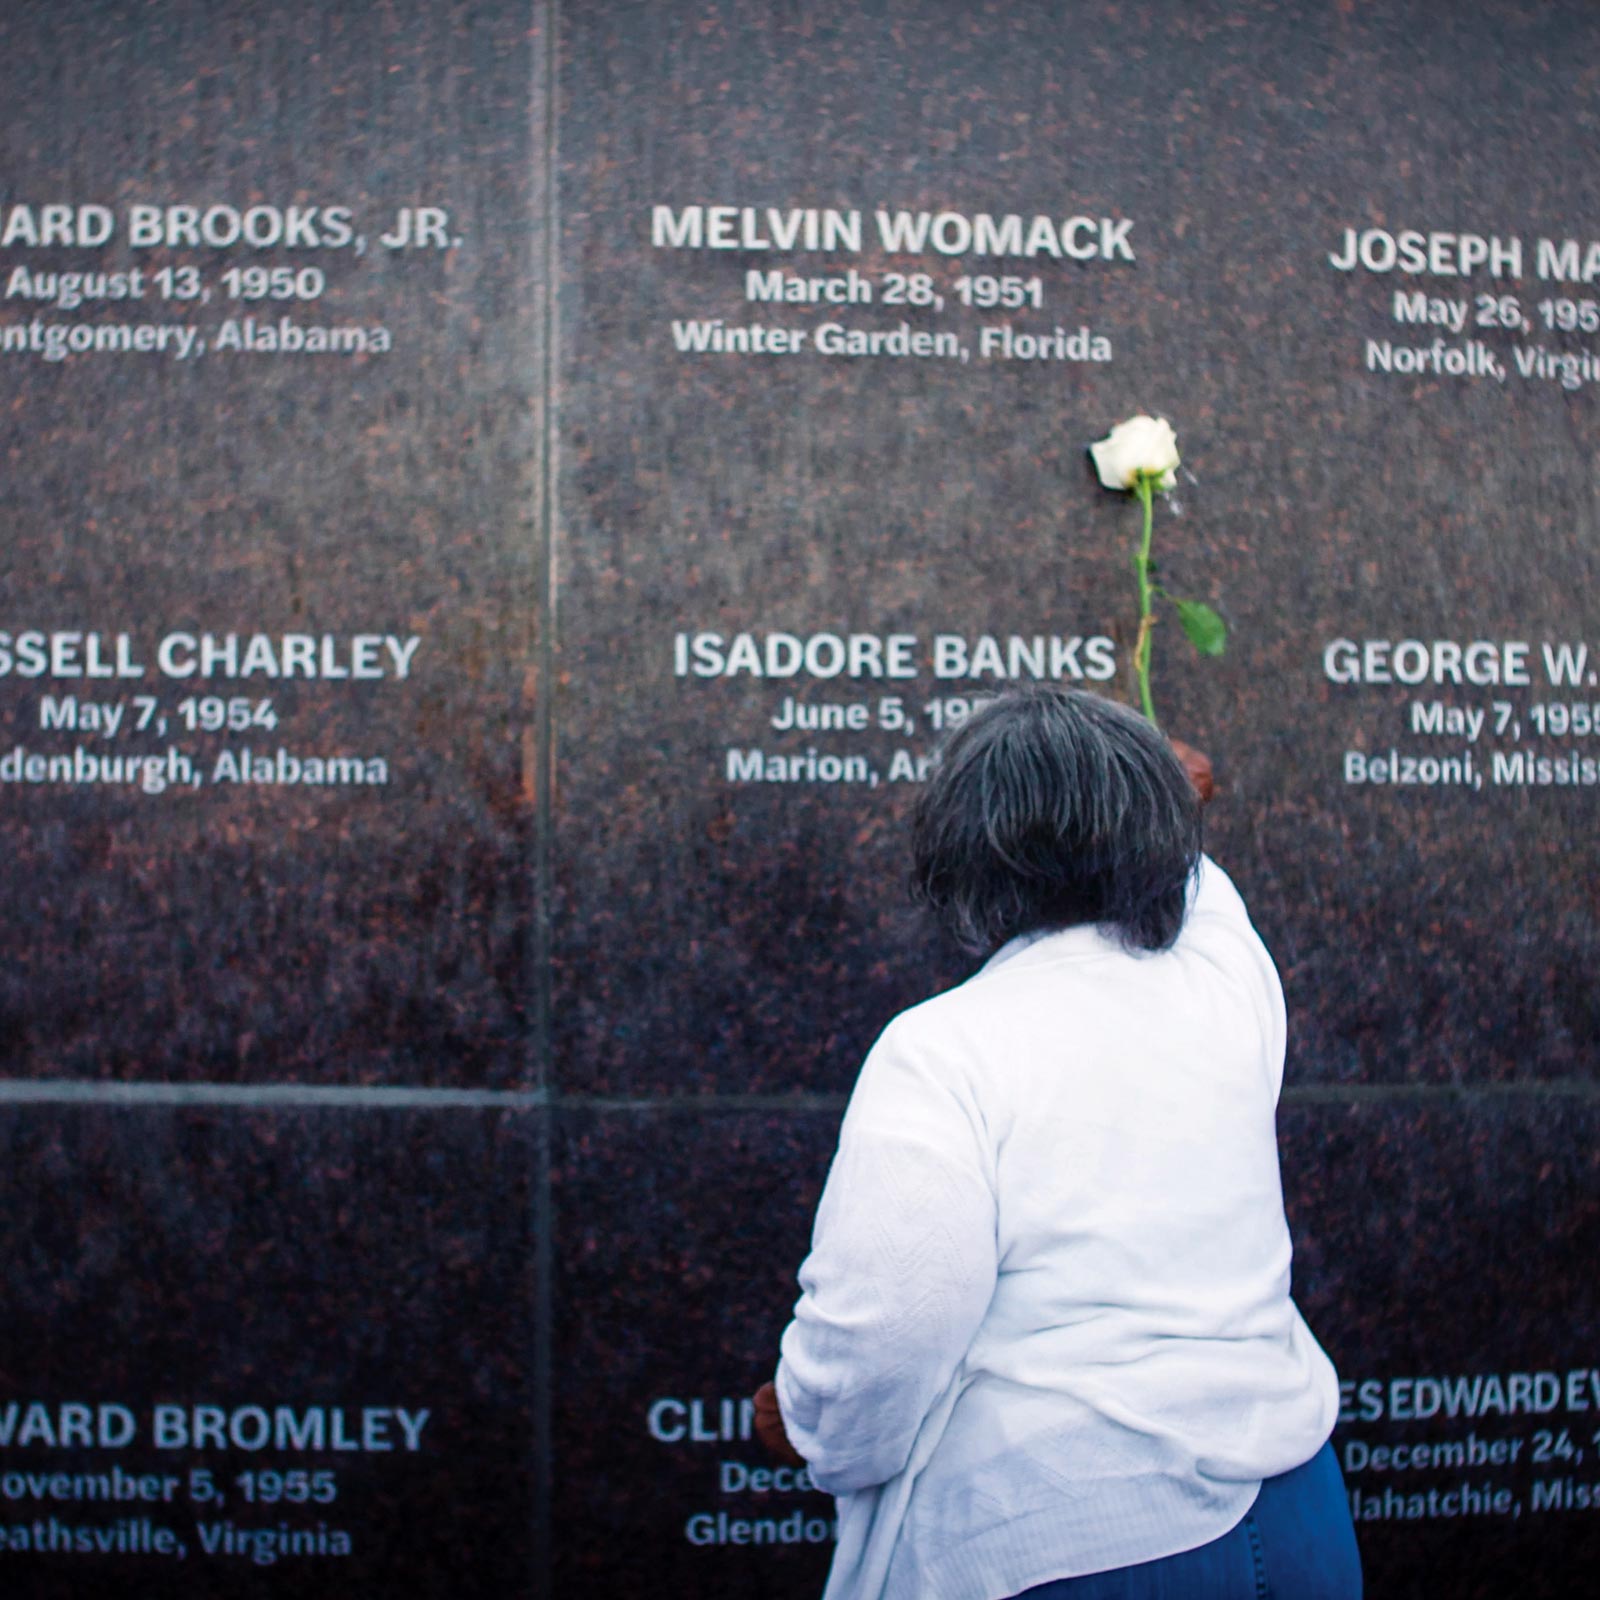 A woman touches a white rose to the monument at the Peace and Justice Memorial Center to honor a family member who was lynched during the 1950s.